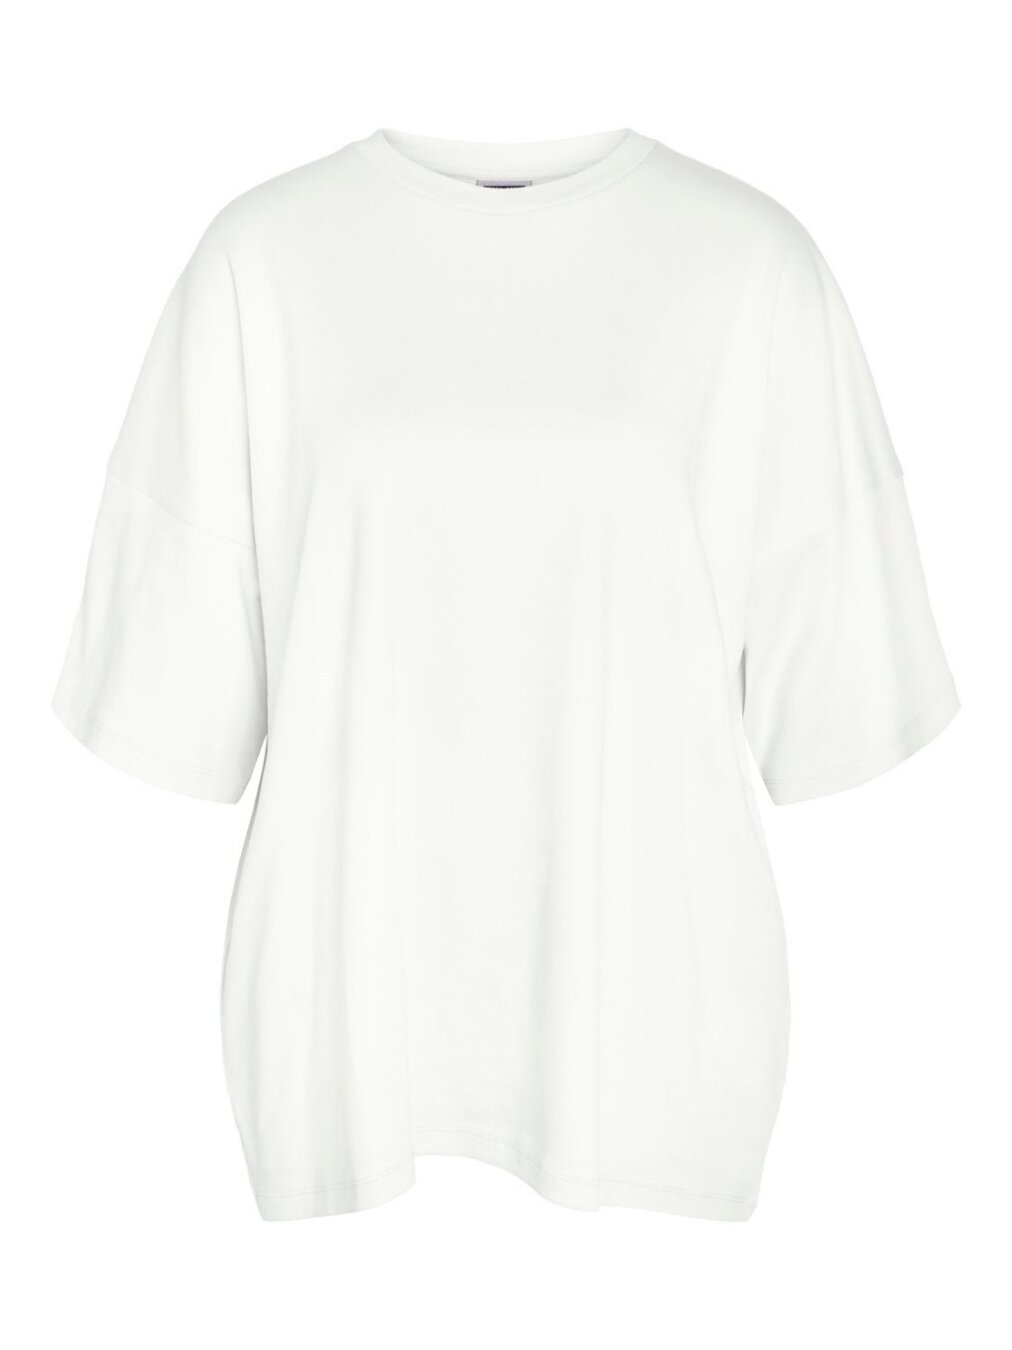 NMKIM S/S UNISEX TOP JRS FWD